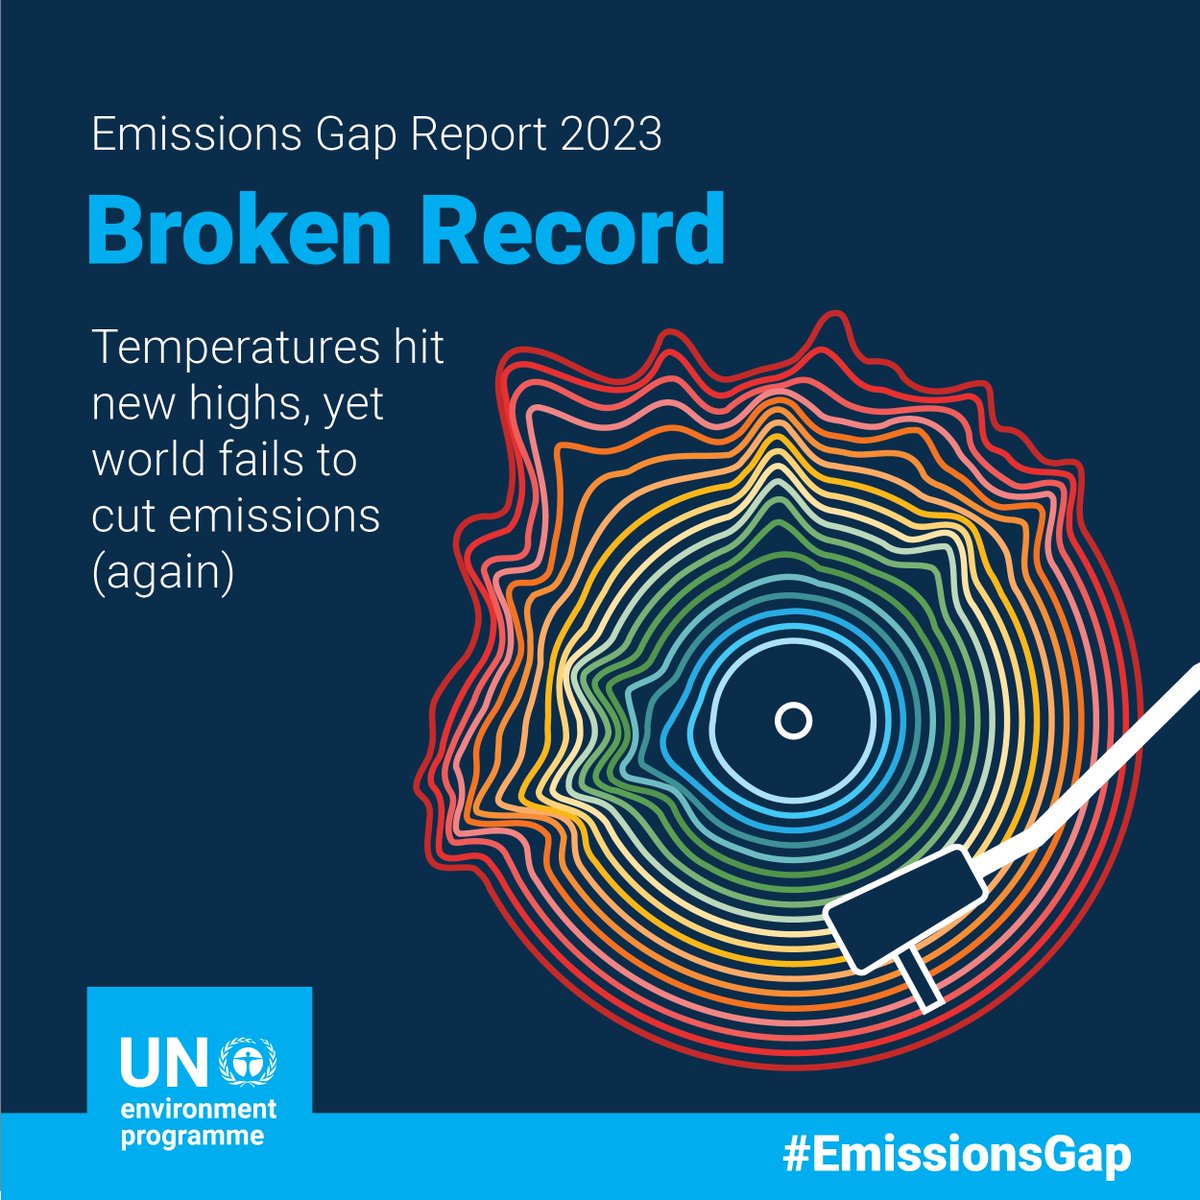 The world is on track for a temperature rise far beyond agreed climate goals during this century.

UNEP's 2023 #EmissionsGap Report outlines the urgent steps needed to meet the Paris Agreement goals.
➡️🔗unep.org/resources/emis…